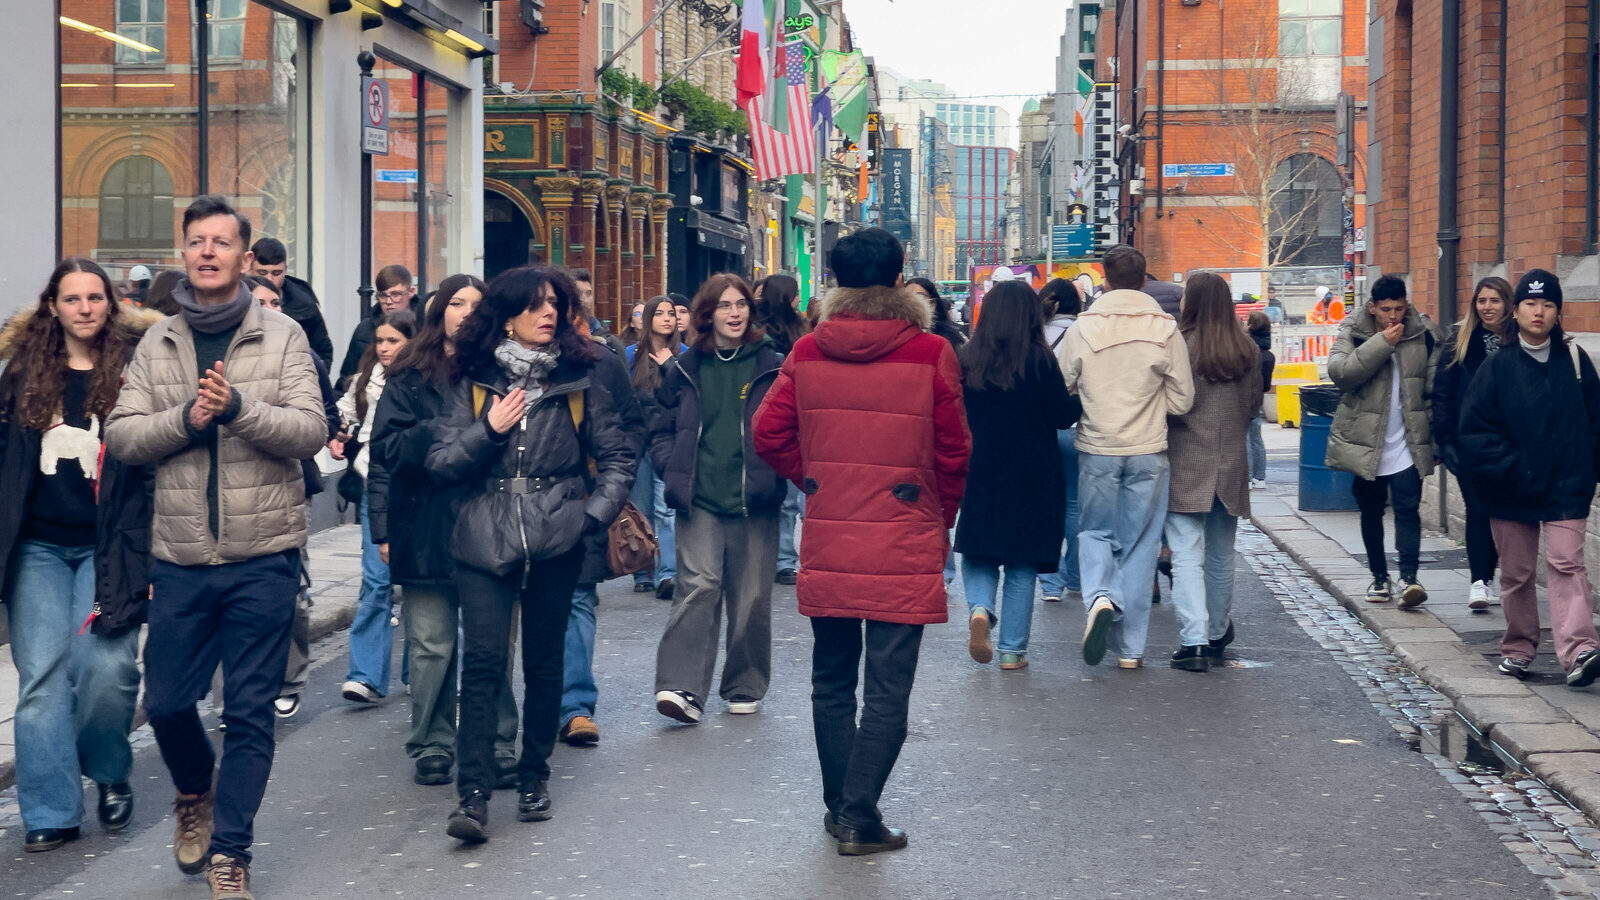 VISITING DUBLIN FOR ST PATRICK'S WEEKEND [IS TEMPLE BAR AS GOOD AS MANY CLAIM IT TO BE?]-229480-1